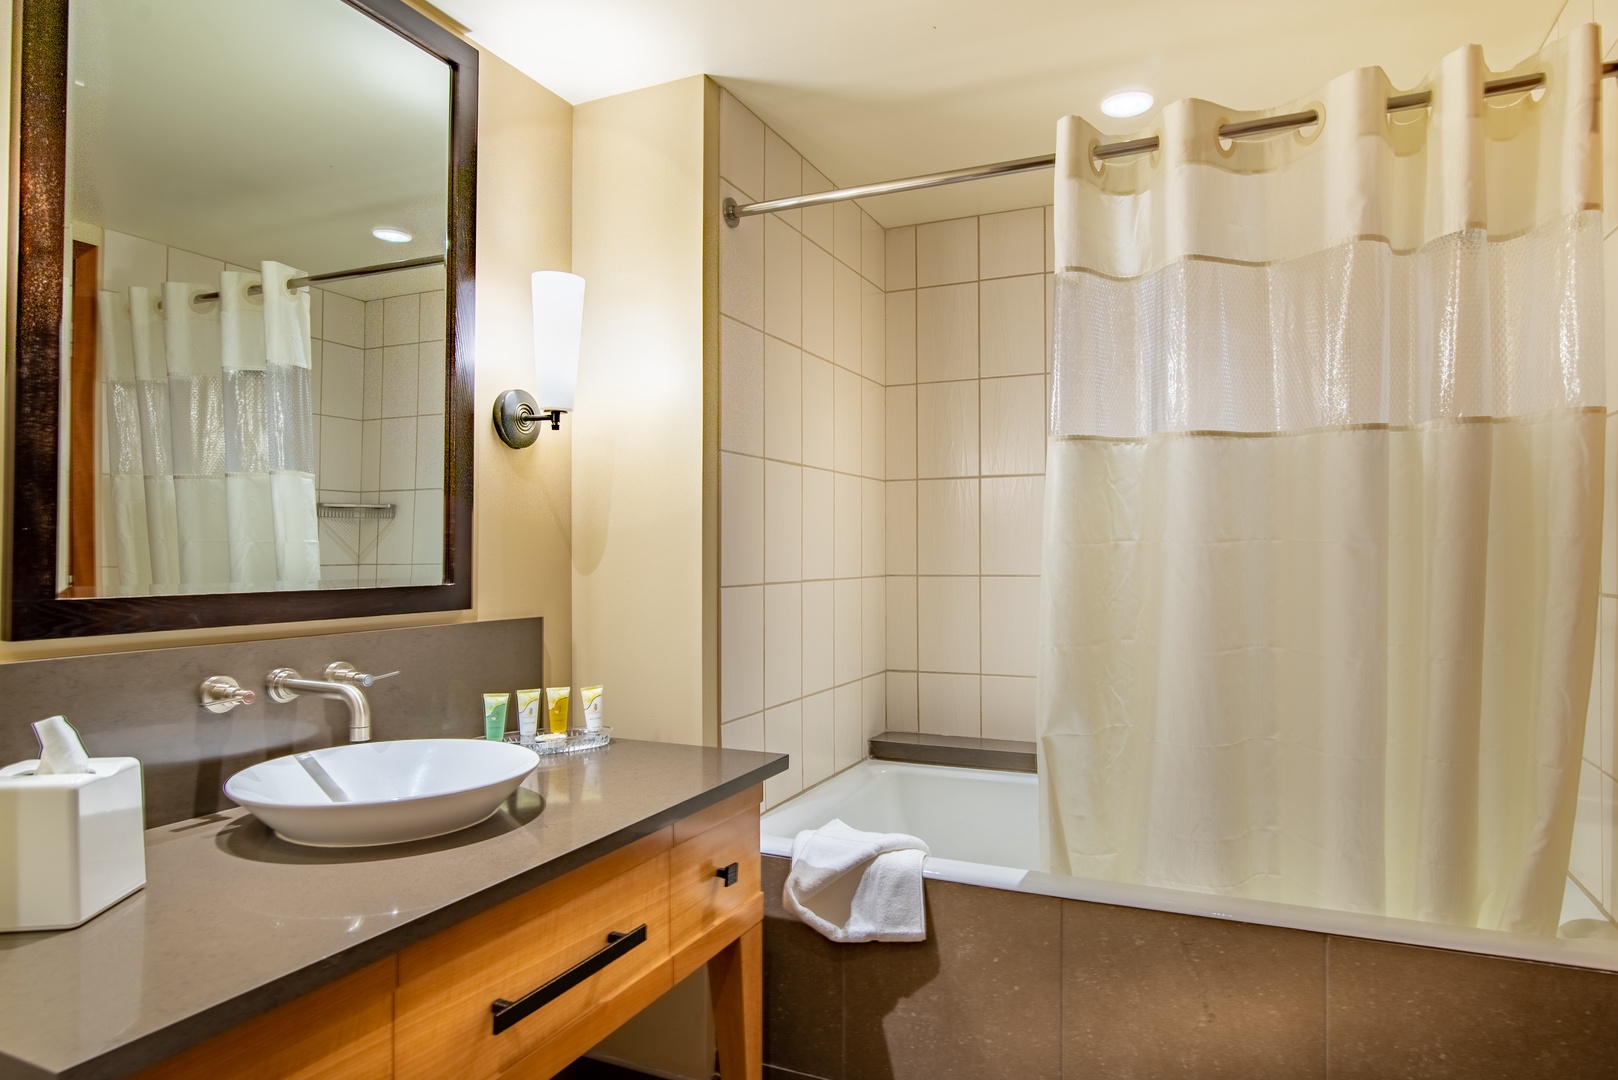 Kapolei Vacation Rentals, Ko Olina Beach Villas B609 - The second guest bathroom has a shower and tub combo.